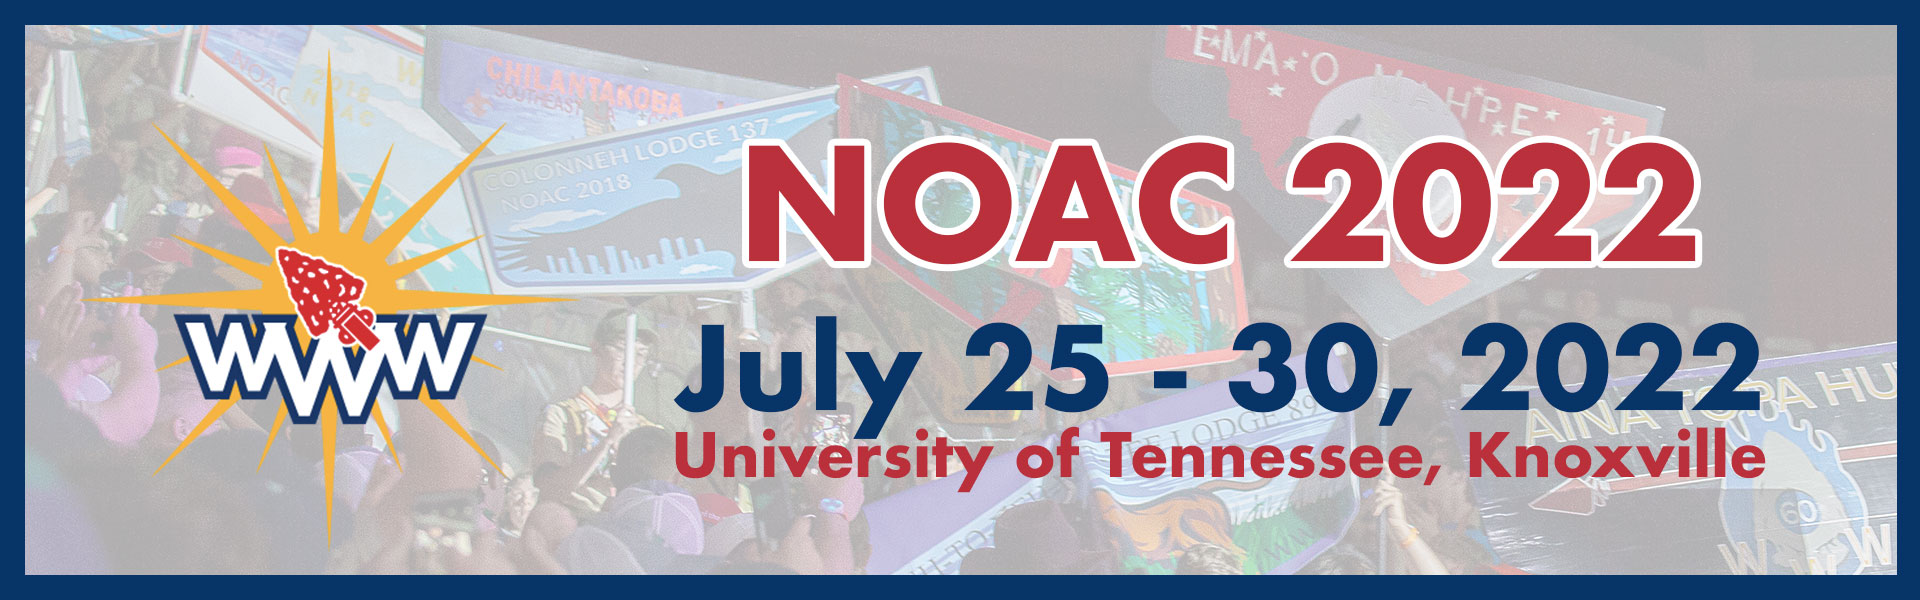 NOAC 2022 will be held at the University of Tennessee, Knoxville on July
  25-30, 2022!